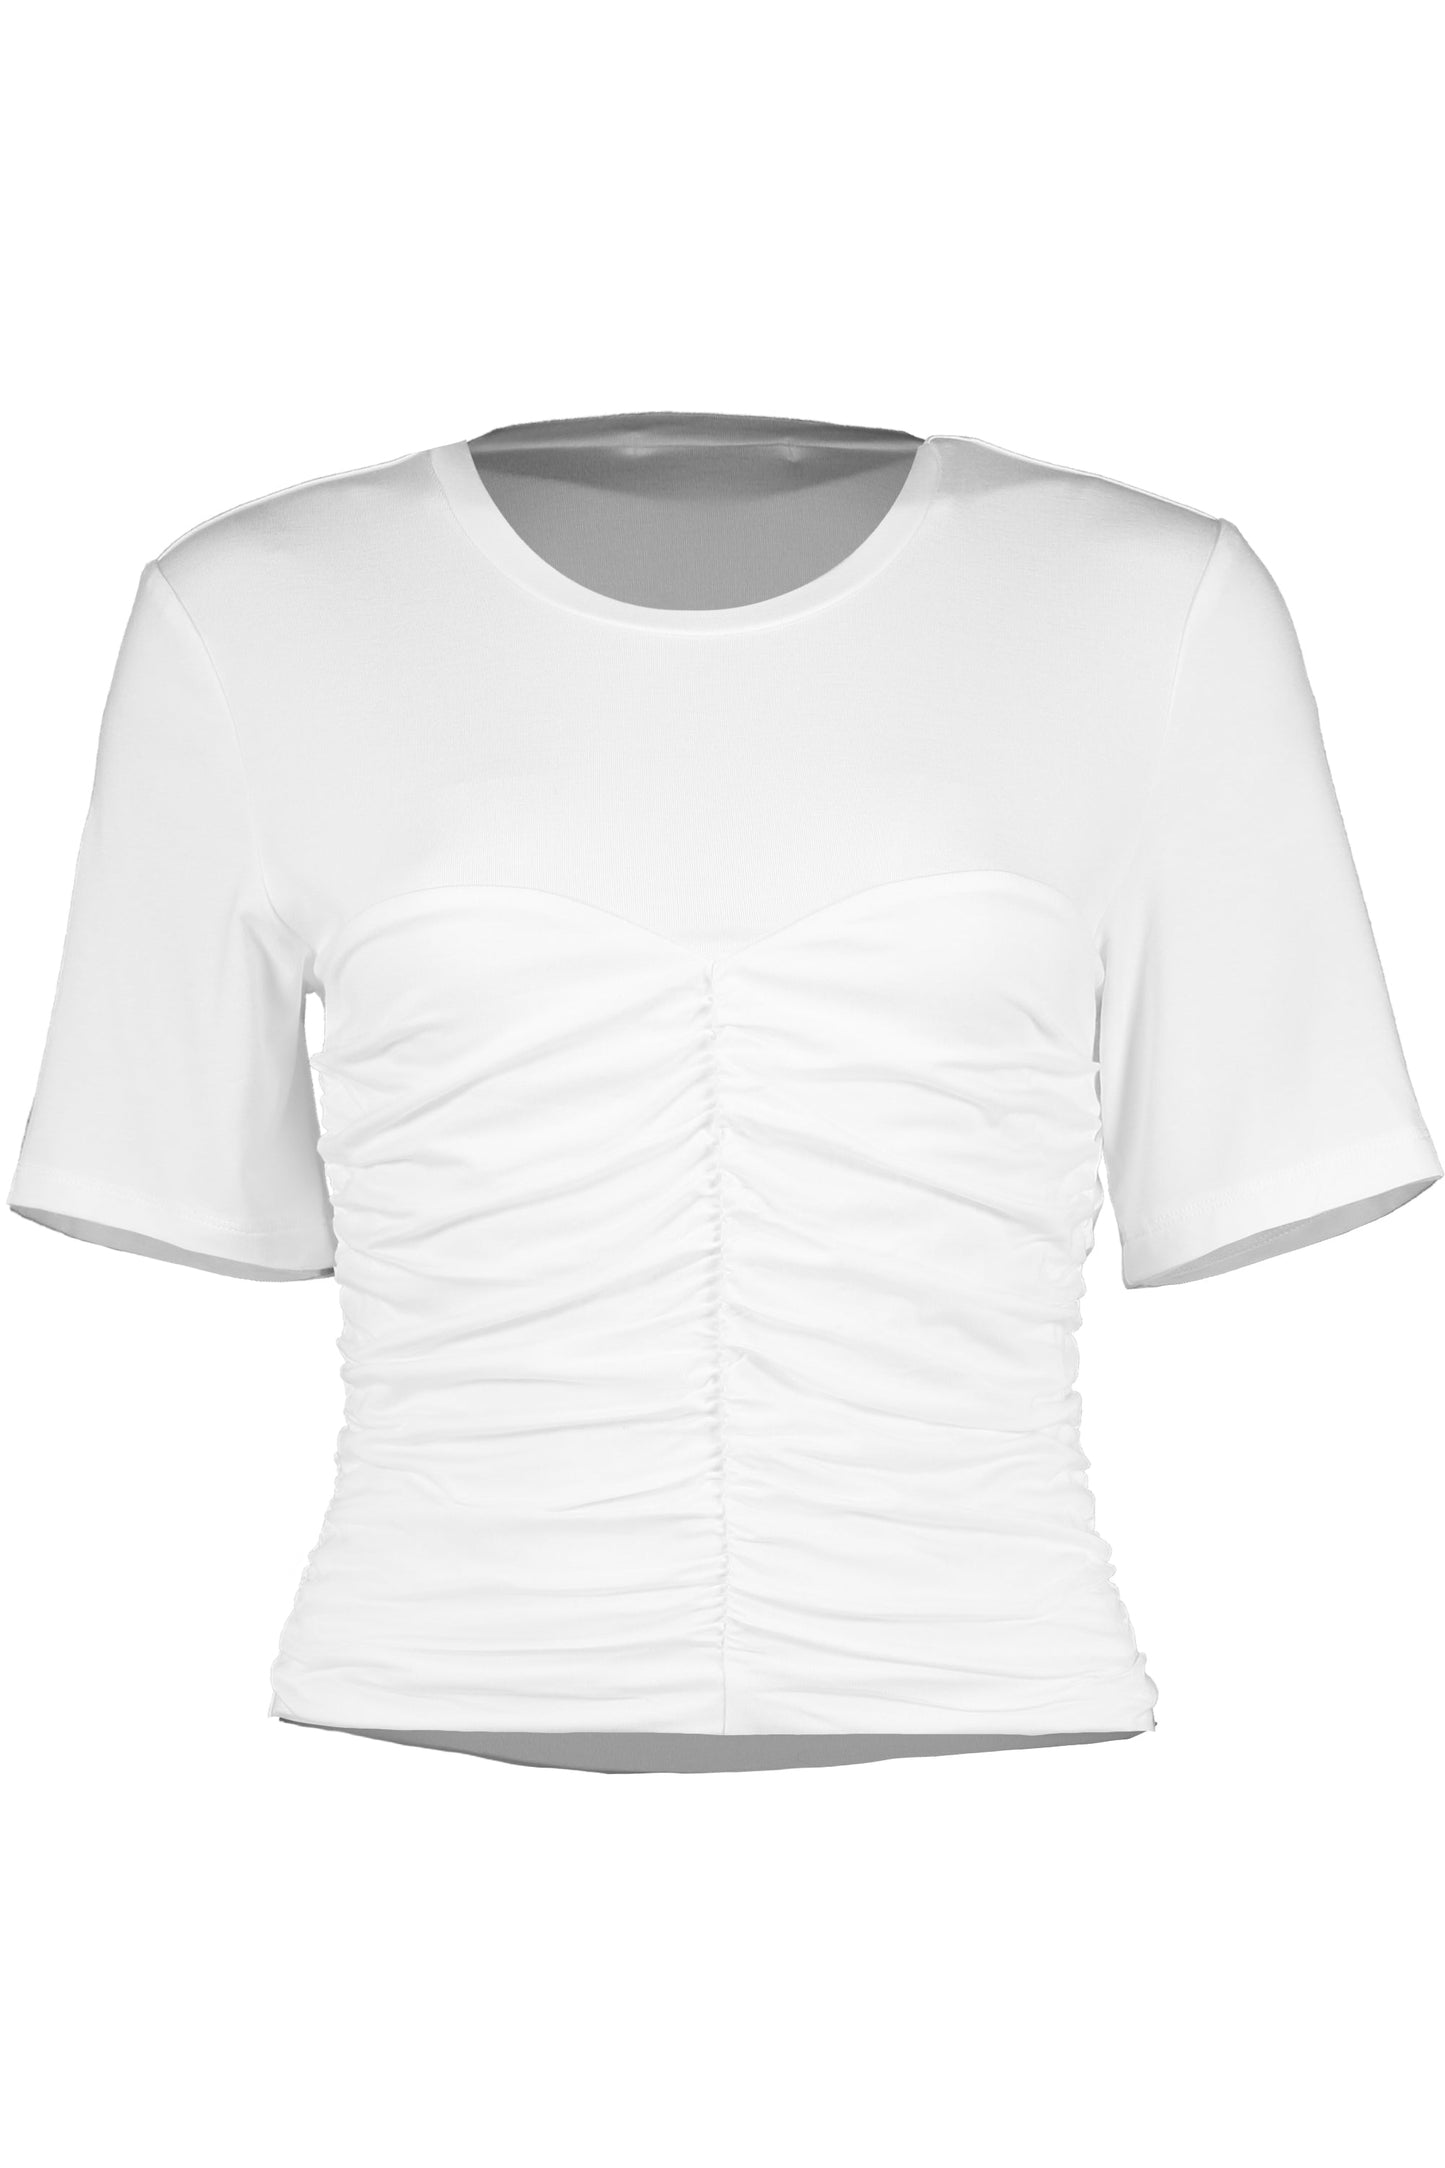 SIMKHAI-Tansy Ruched Bustier Tee - White-